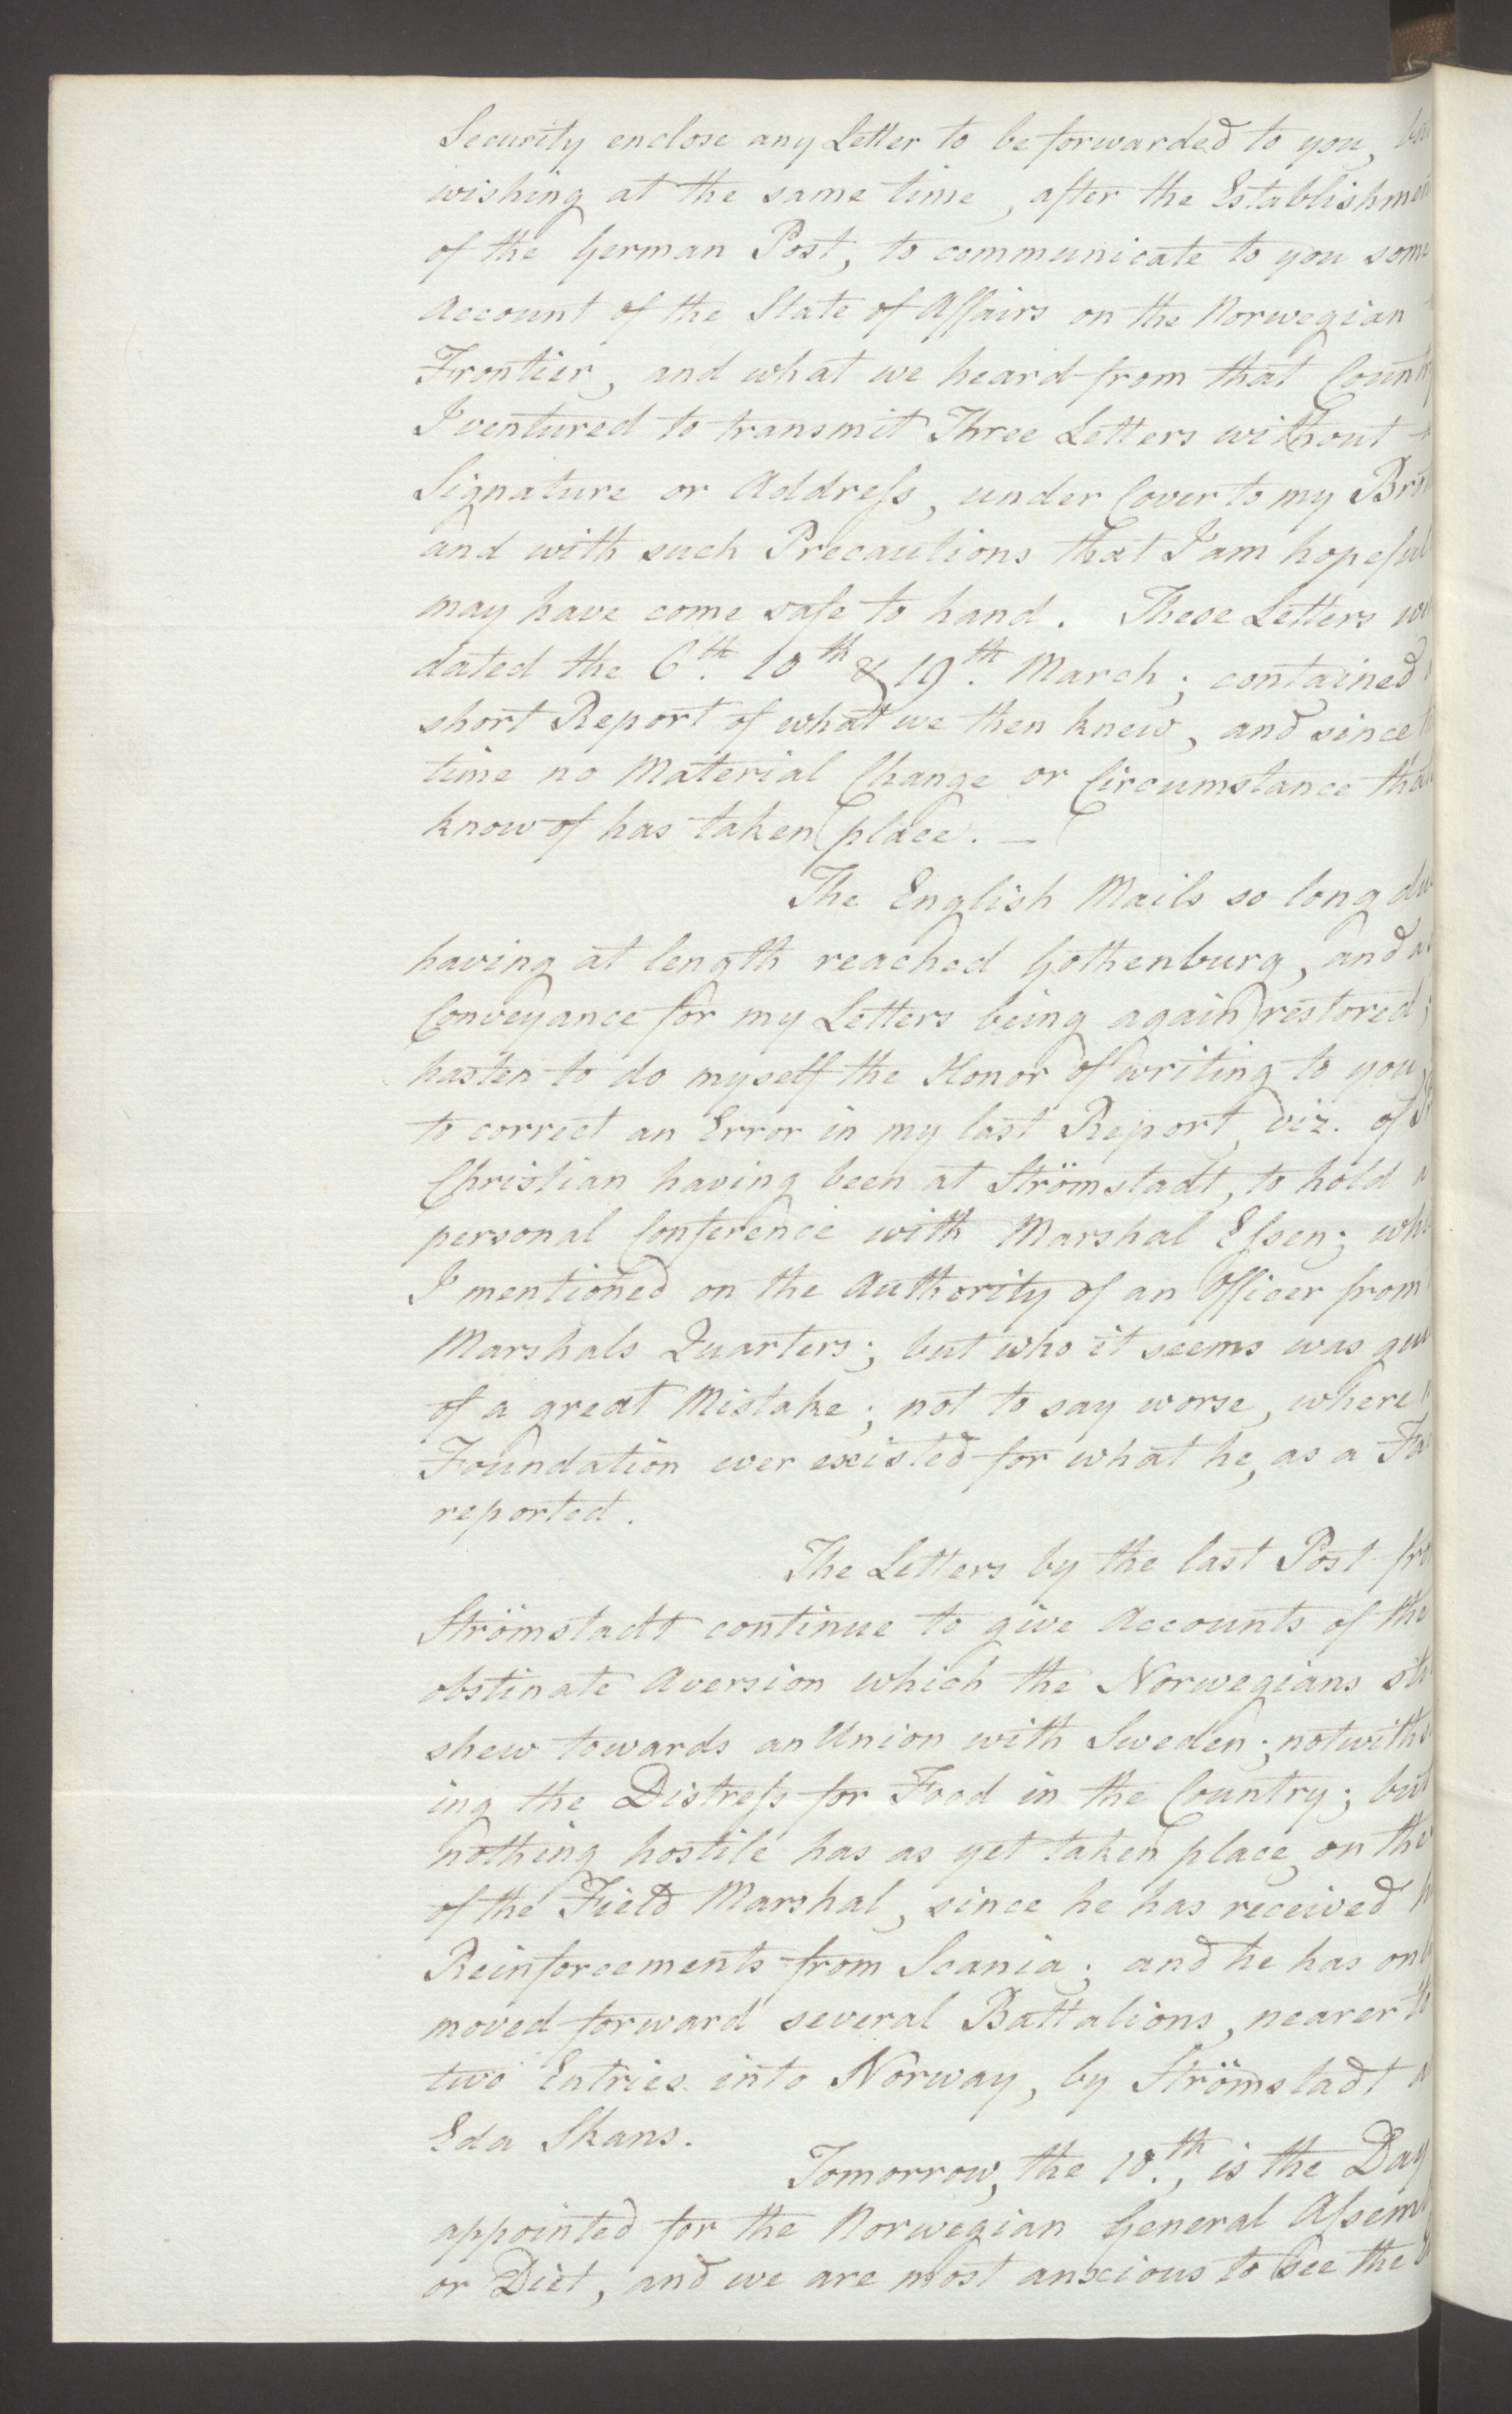 Foreign Office*, UKA/-/FO 38/16: Sir C. Gordon. Reports from Malmö, Jonkoping, and Helsingborg, 1814, p. 31